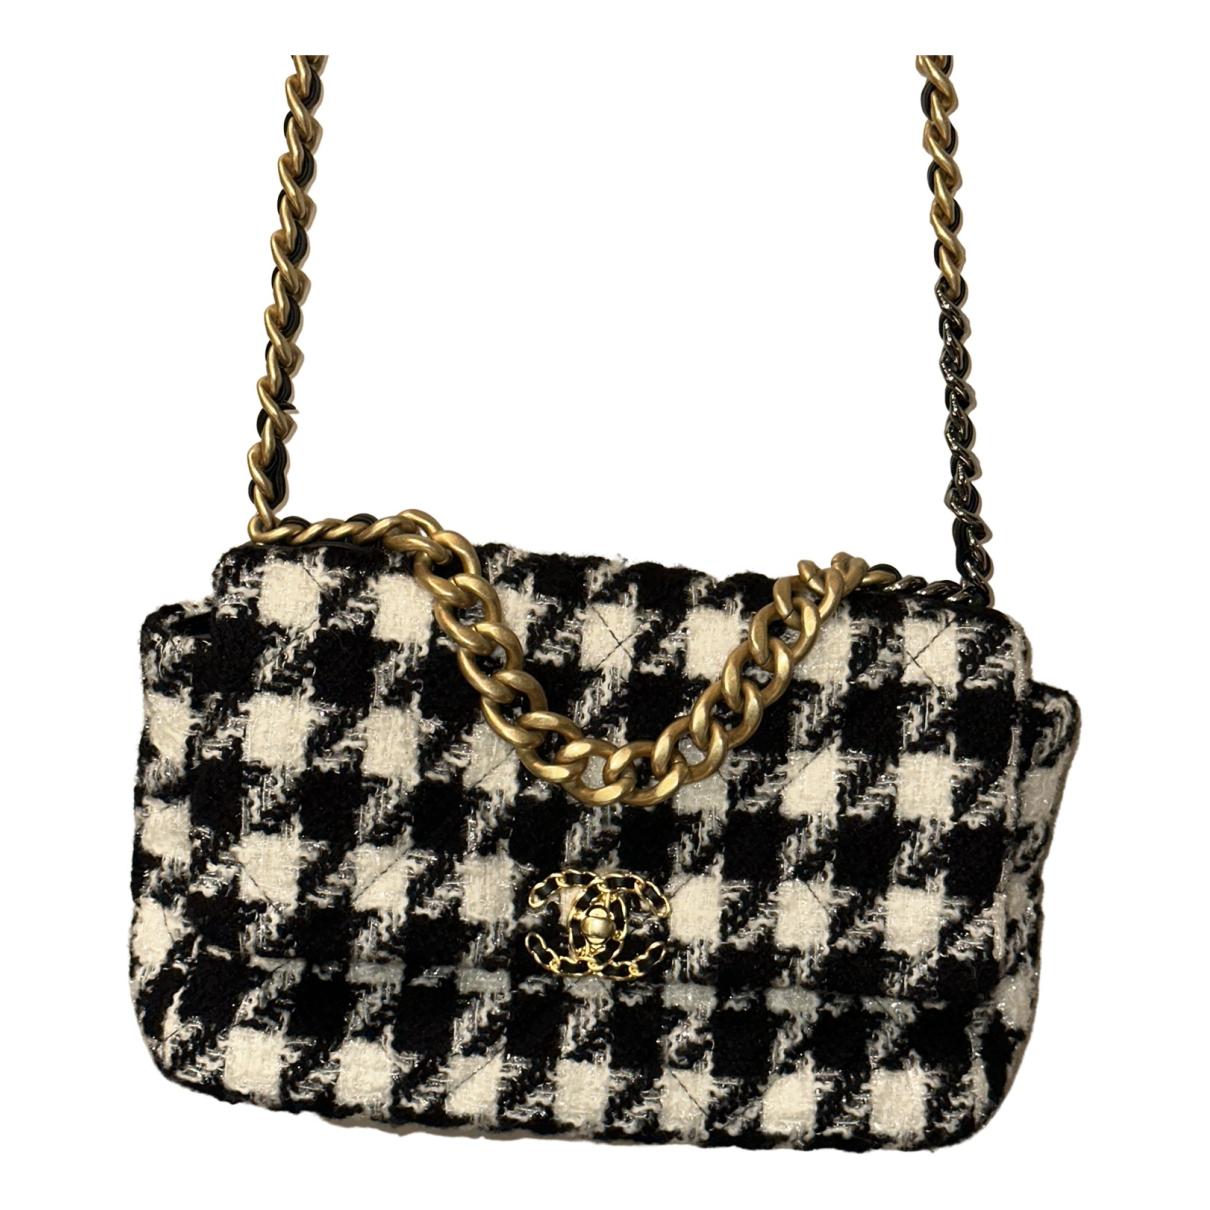 CHANEL Tweed Houndstooth Quilted Medium Chanel 19 Flap Black White